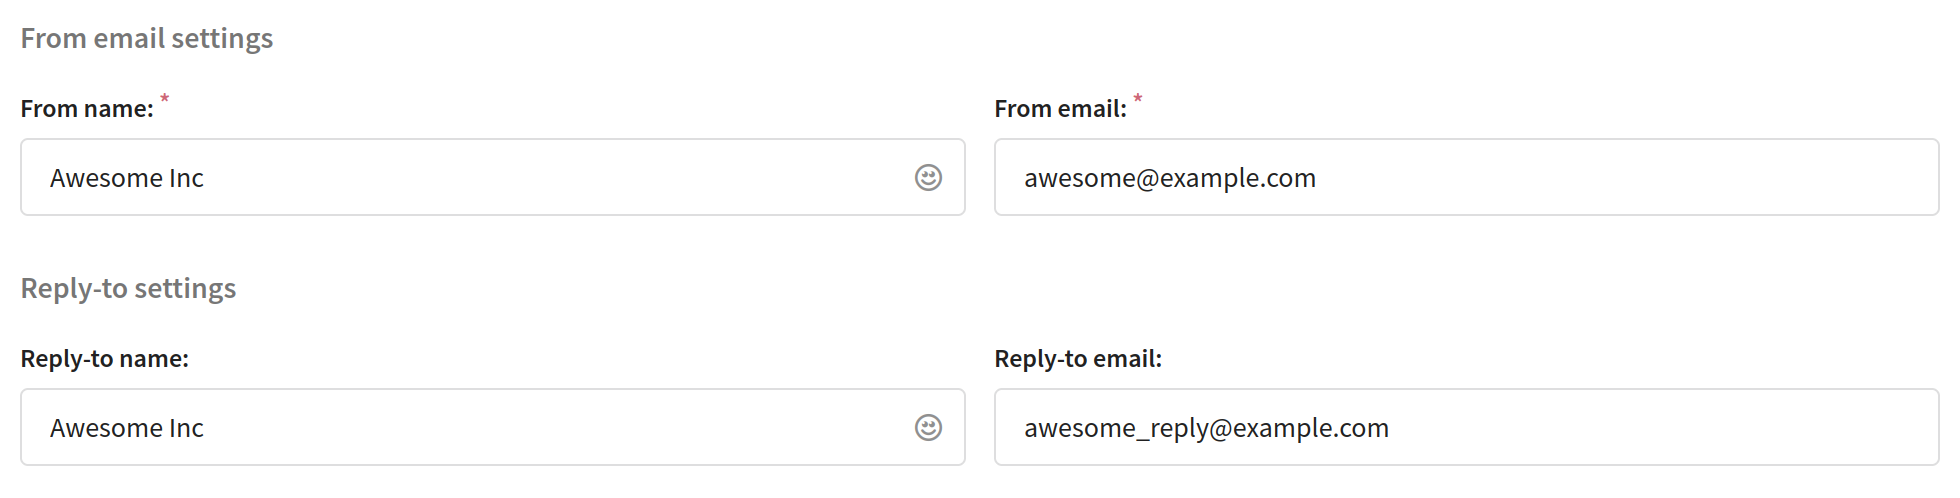 From email and Reply-to settings